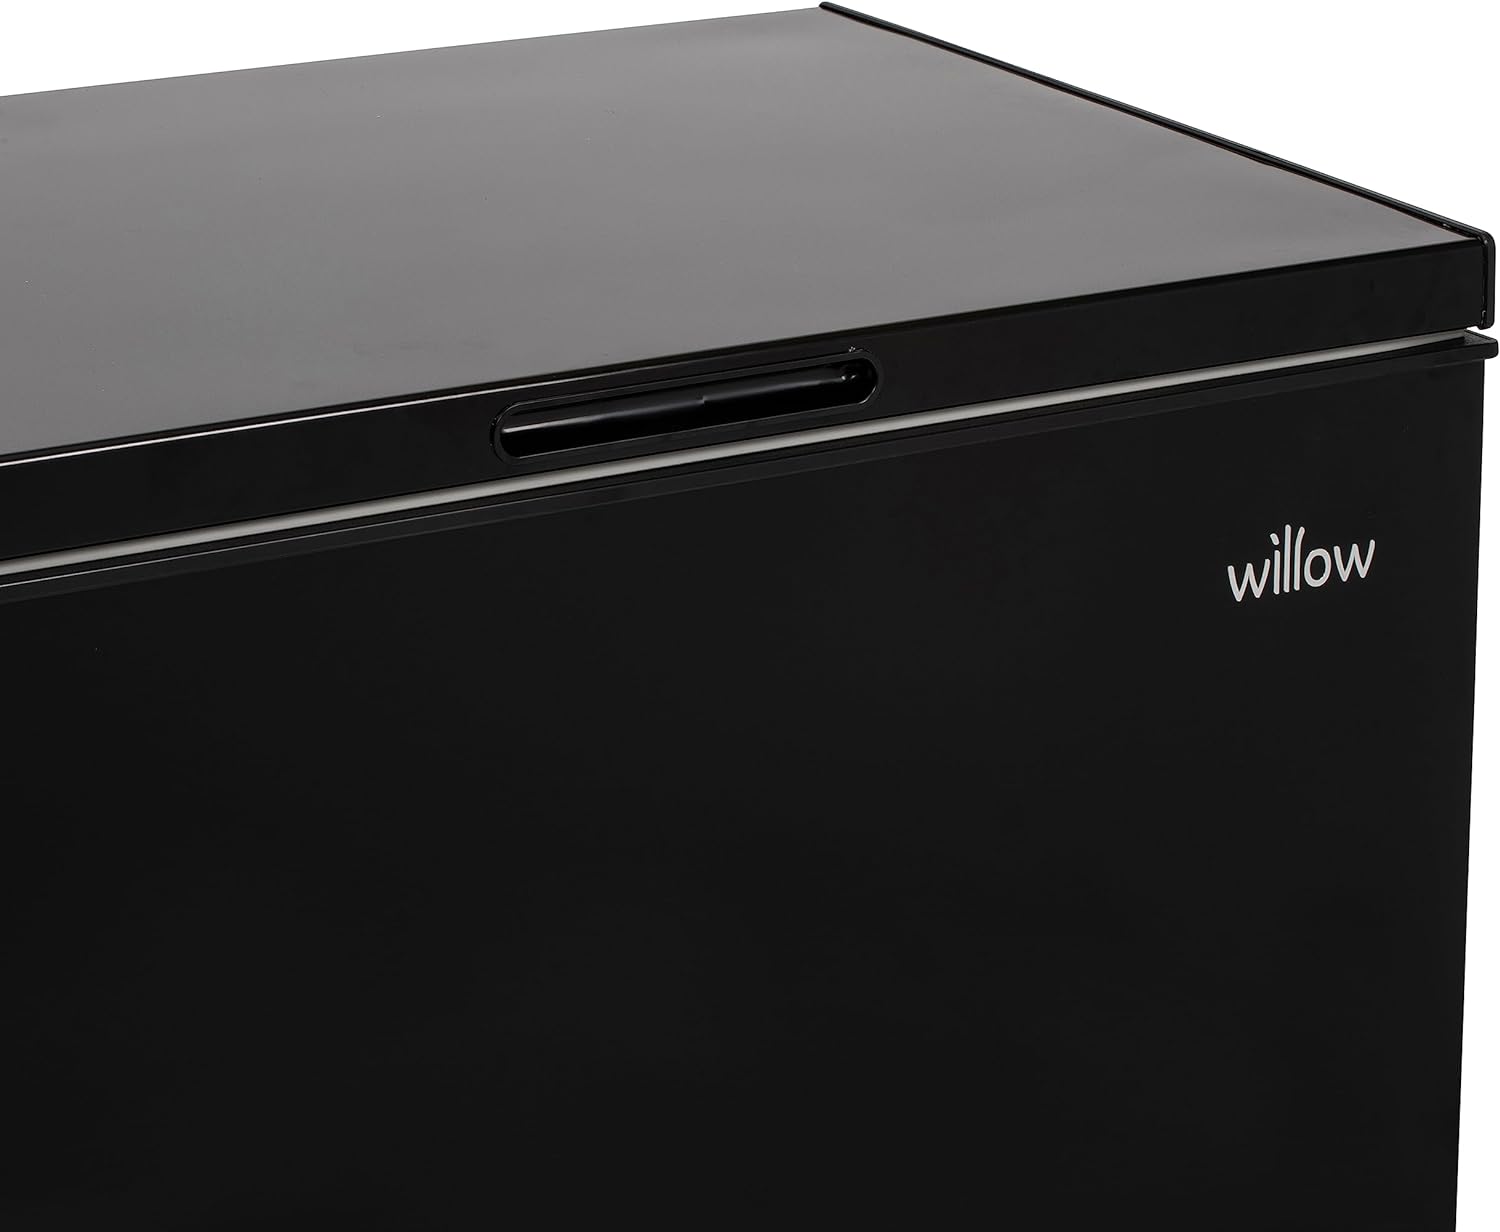 Willow W198CFB 199L Freestanding Chest Freezer with Removable Storage Basket, Adjustable Thermostat, 4* Freezer Rating, Low Noise - Black - Amazing Gadgets Outlet